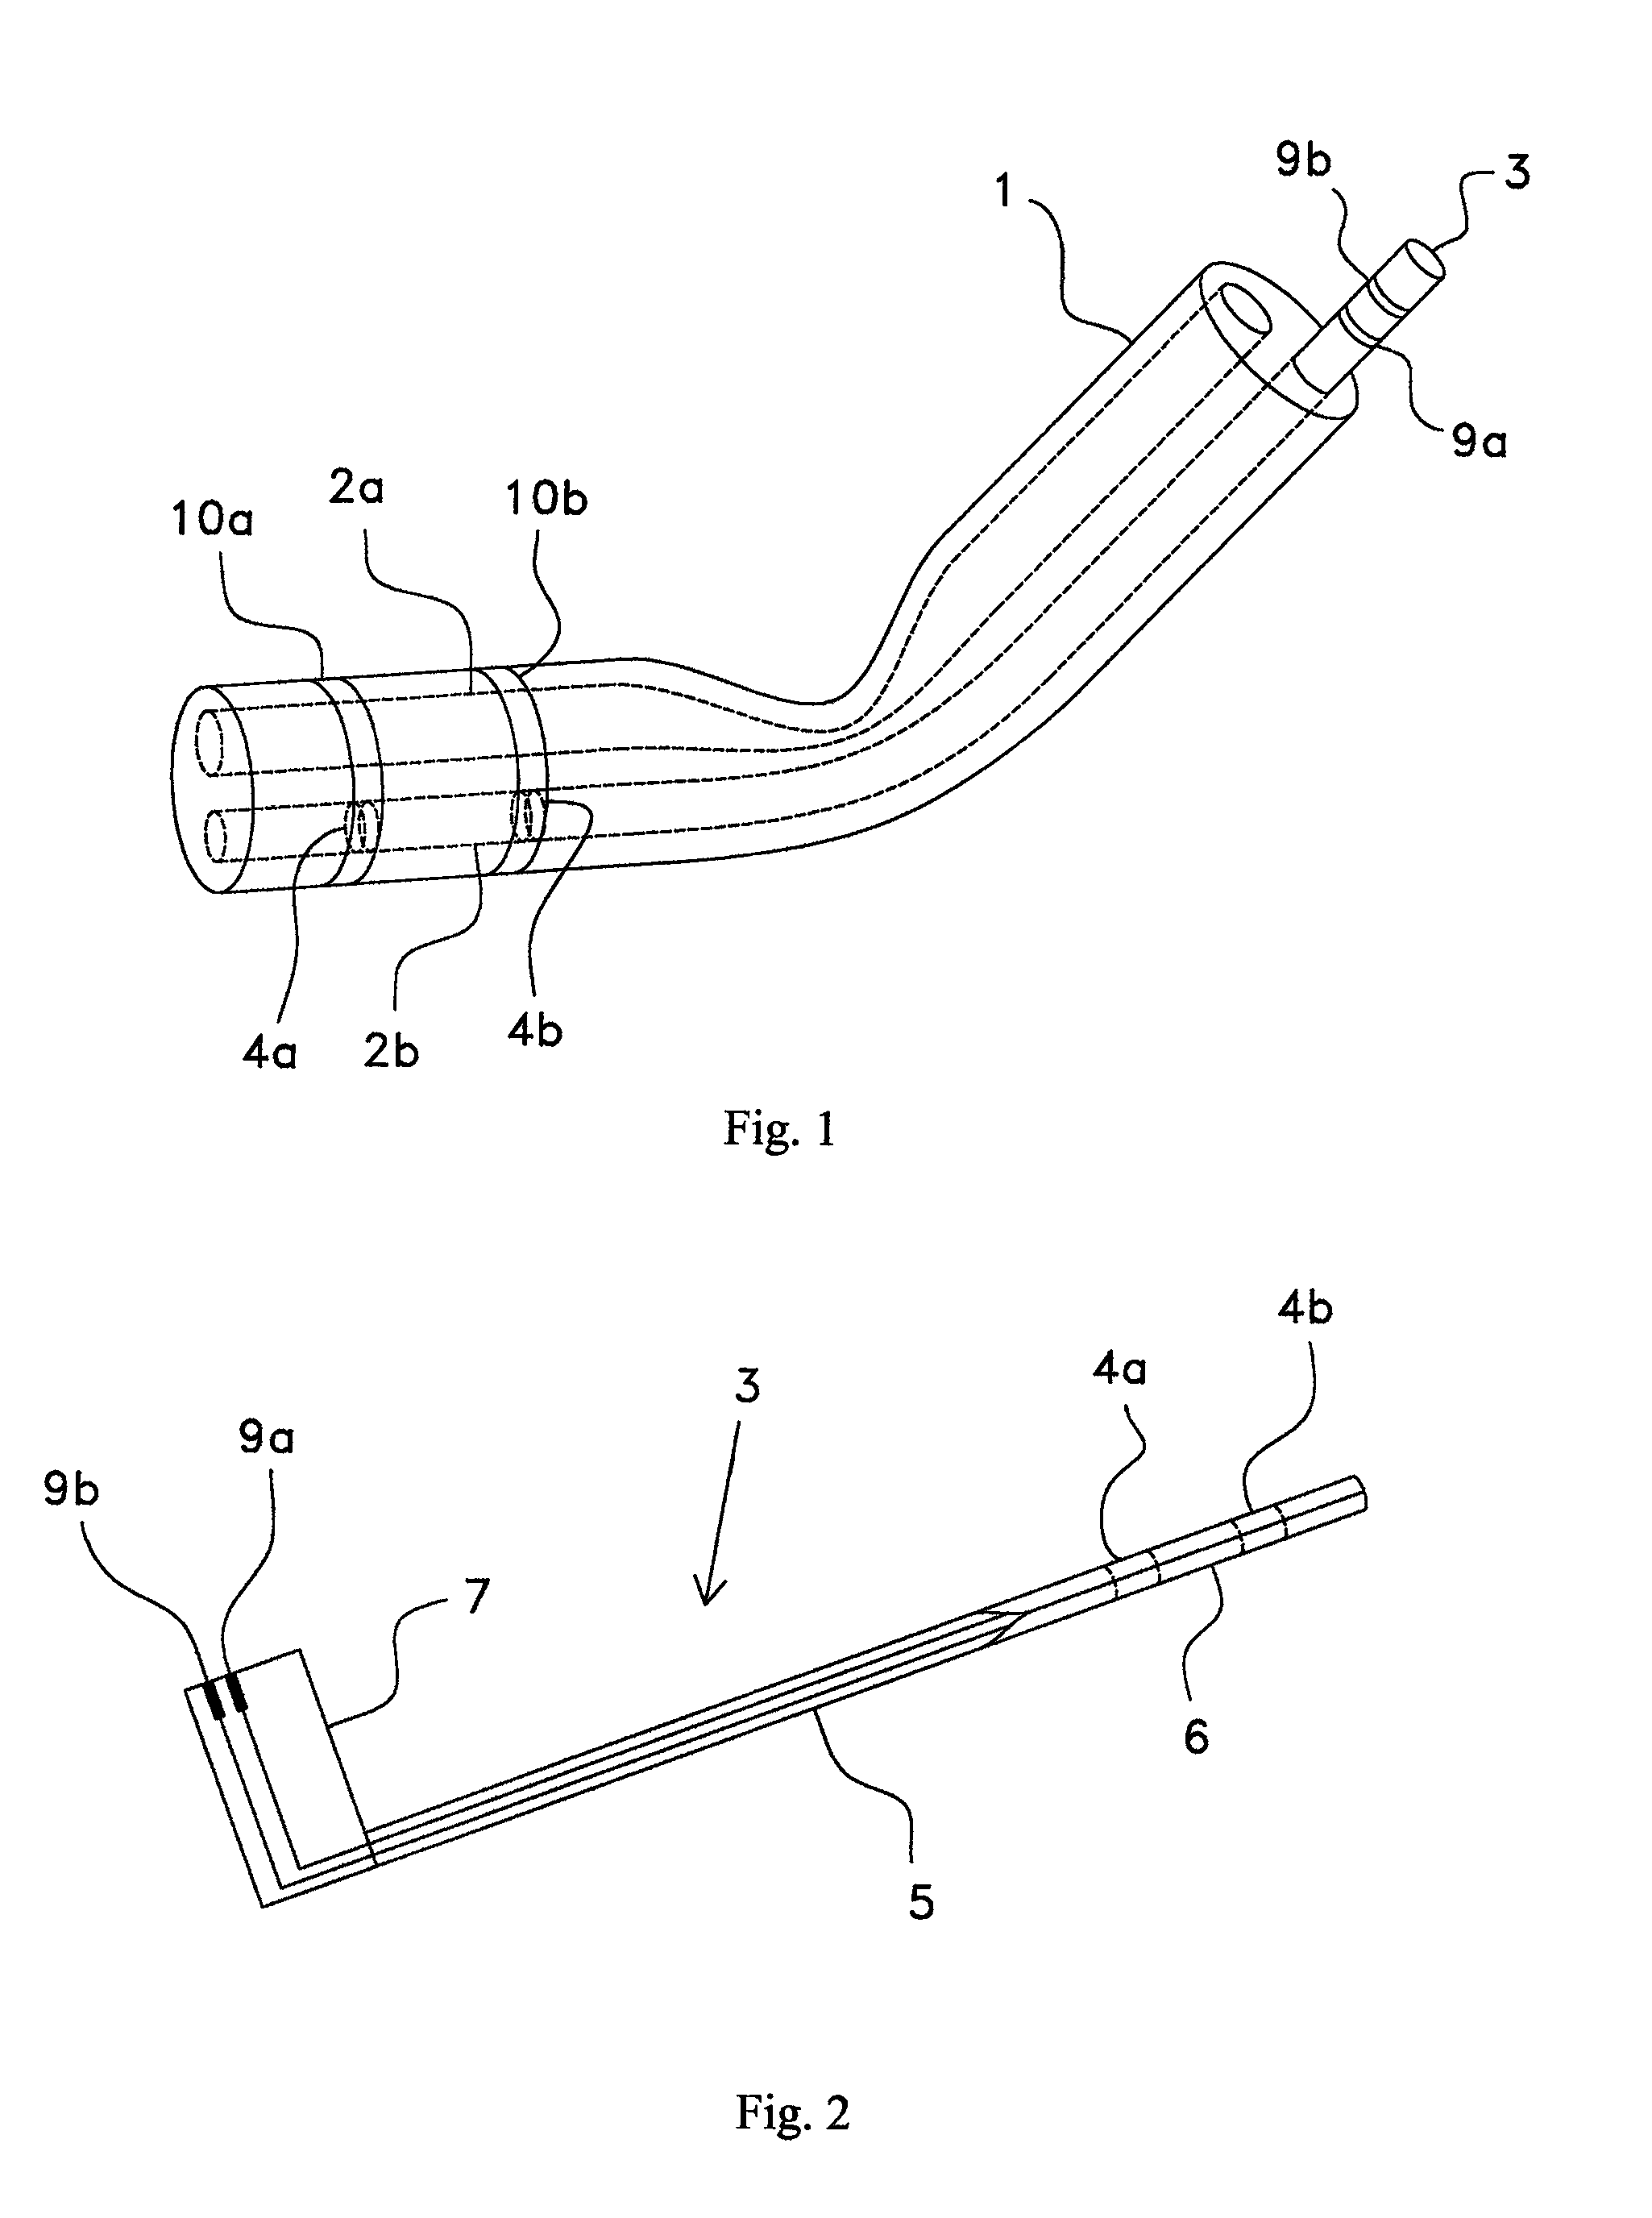 Flexible Conductor Carrier for Catheter and Catheter Fitted with a Conductor Carrier